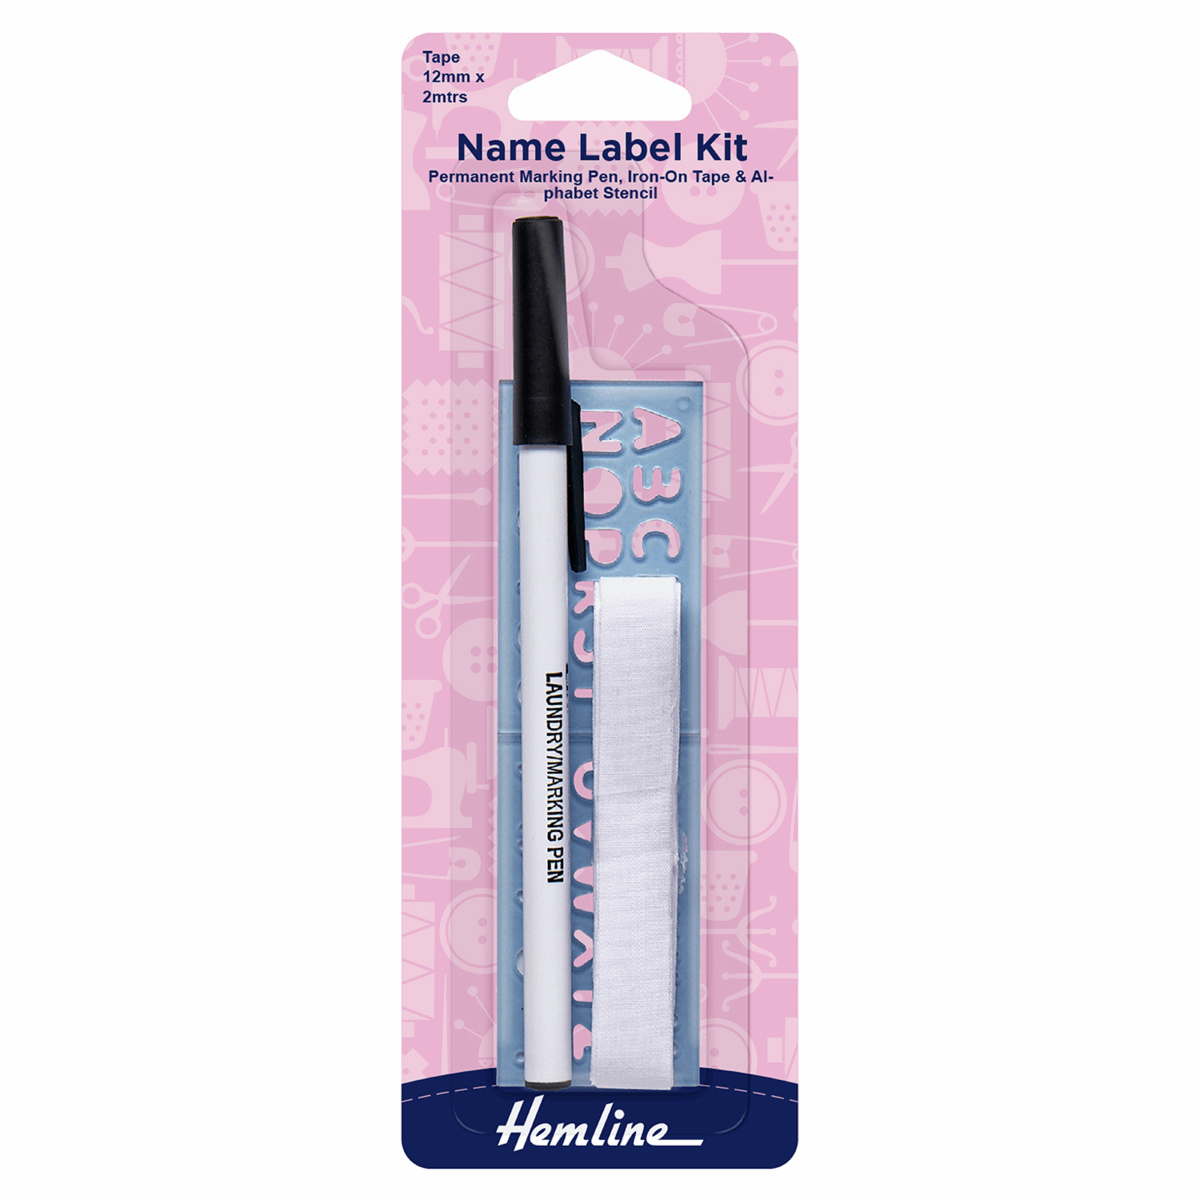 Hemline Iron On Name Label Kit with Pen & Stencil